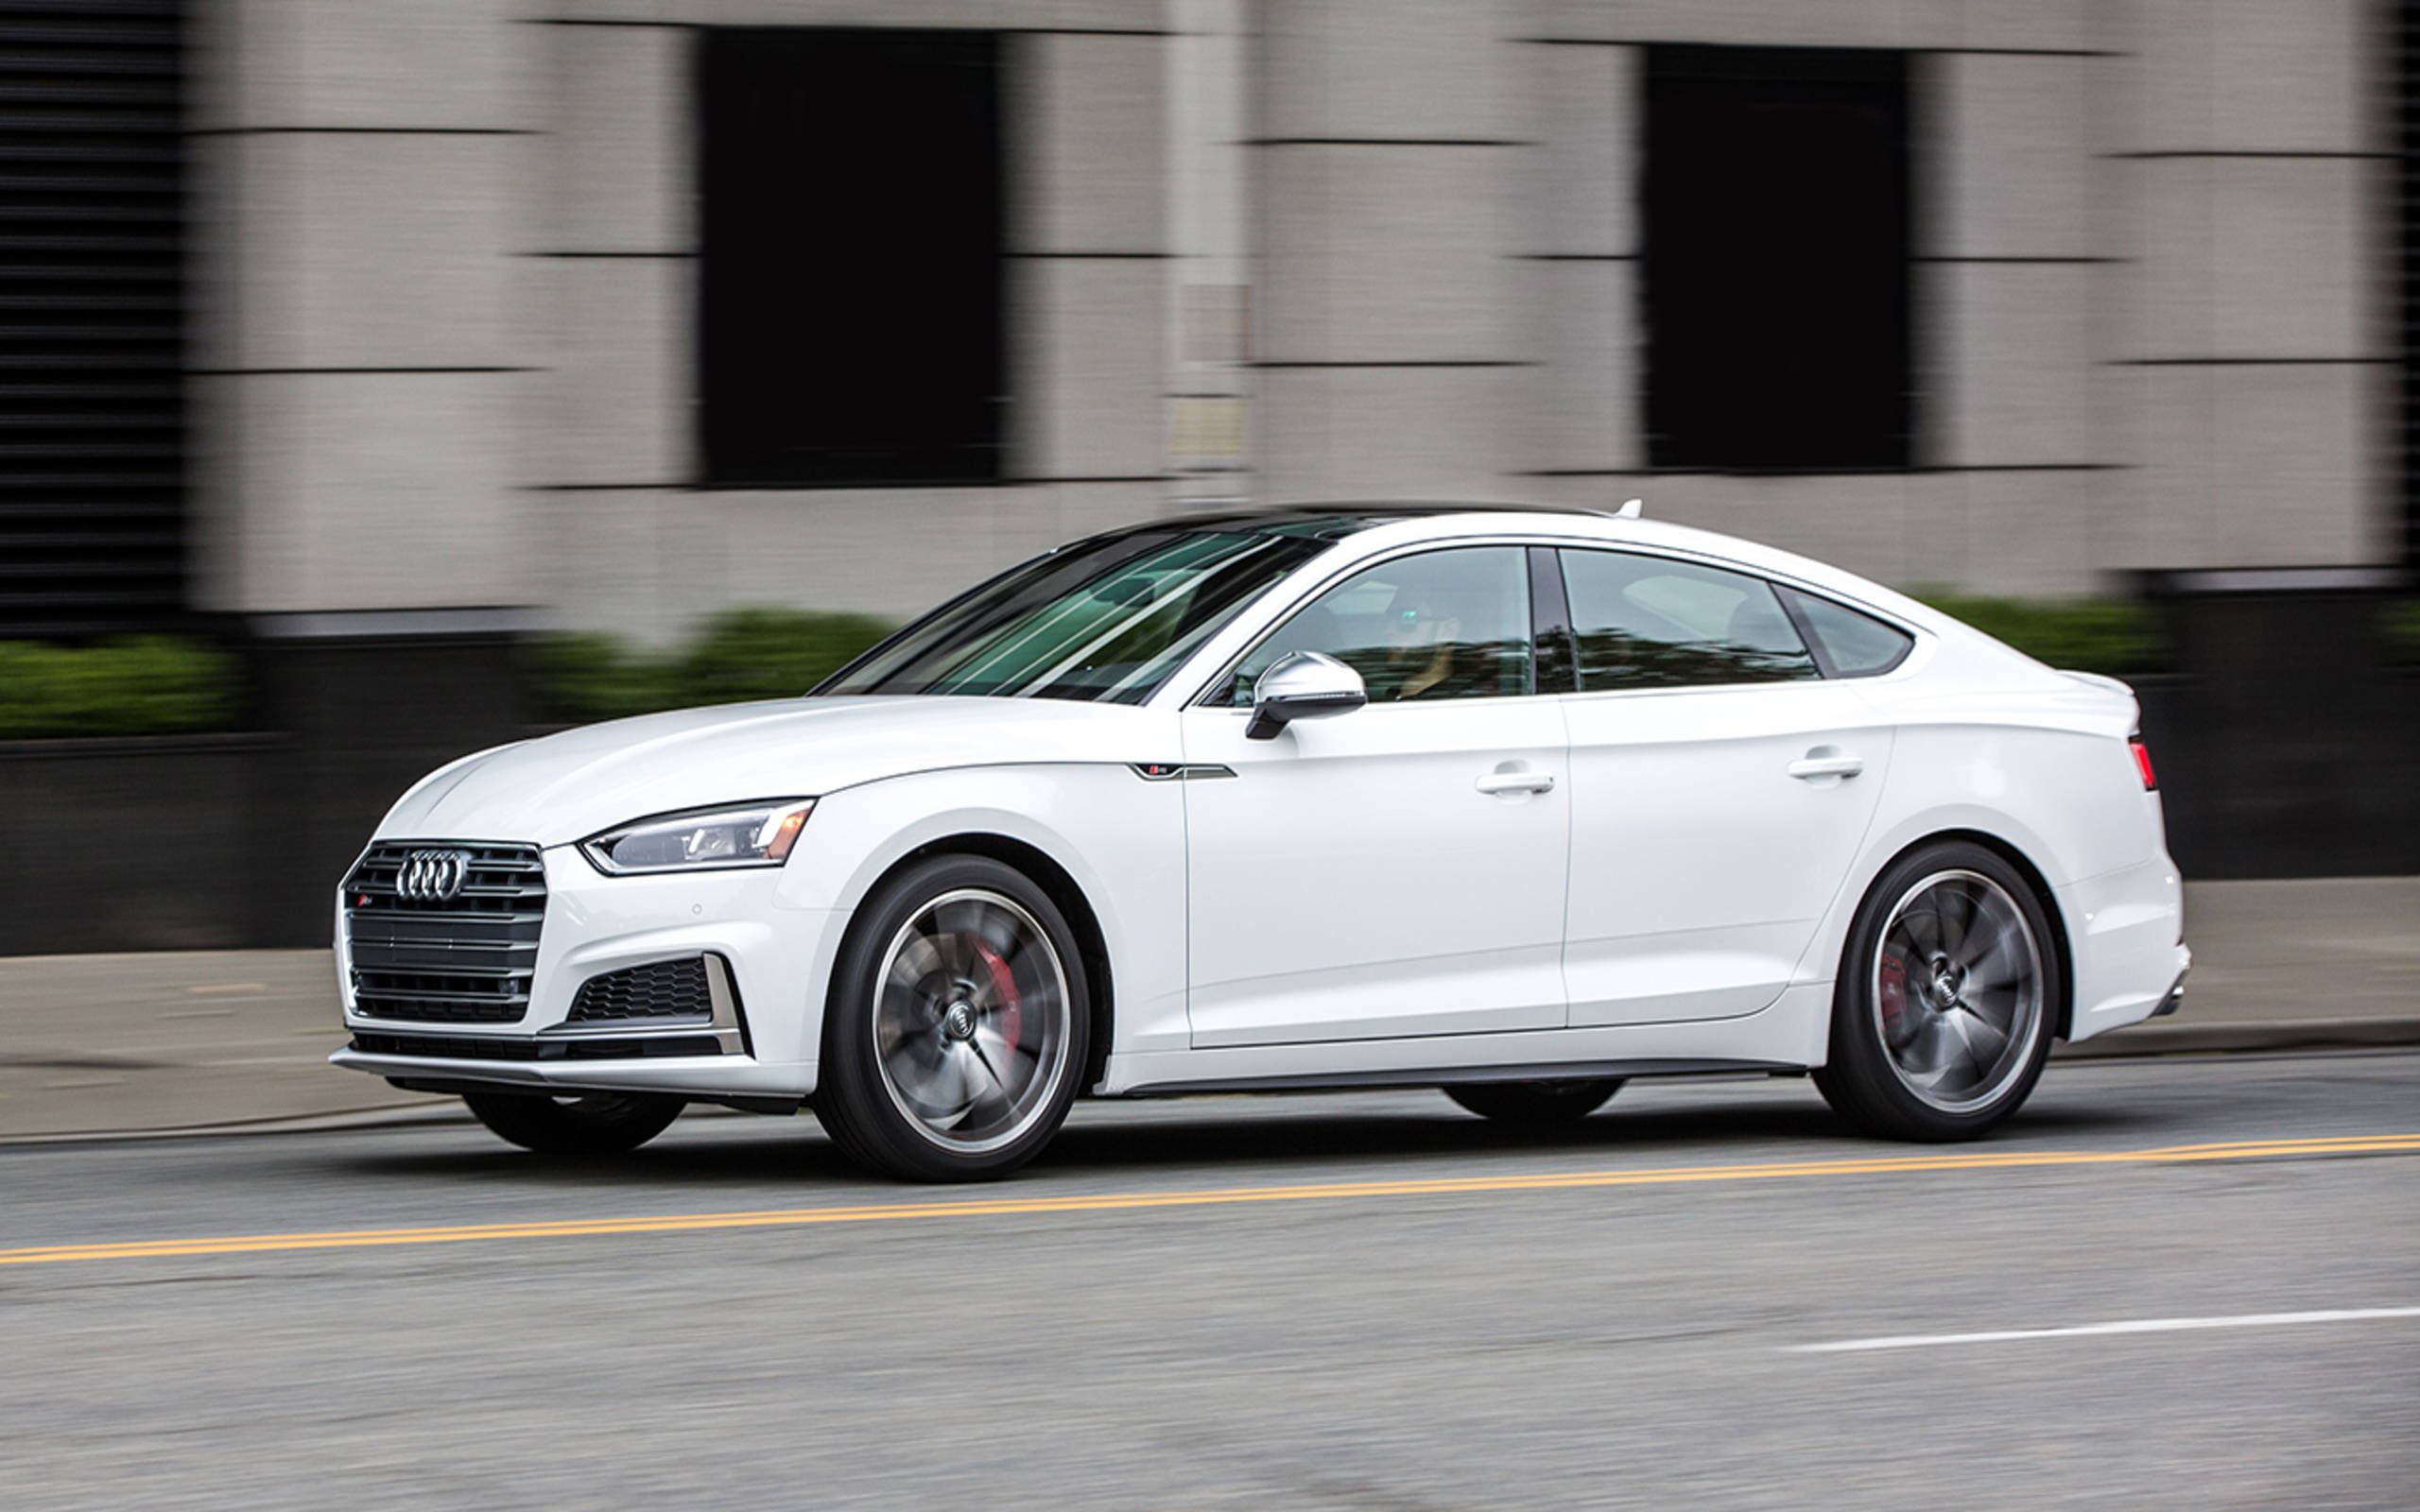 2018 Audi S5 Sportback first drive: Business up front, cargo in the back